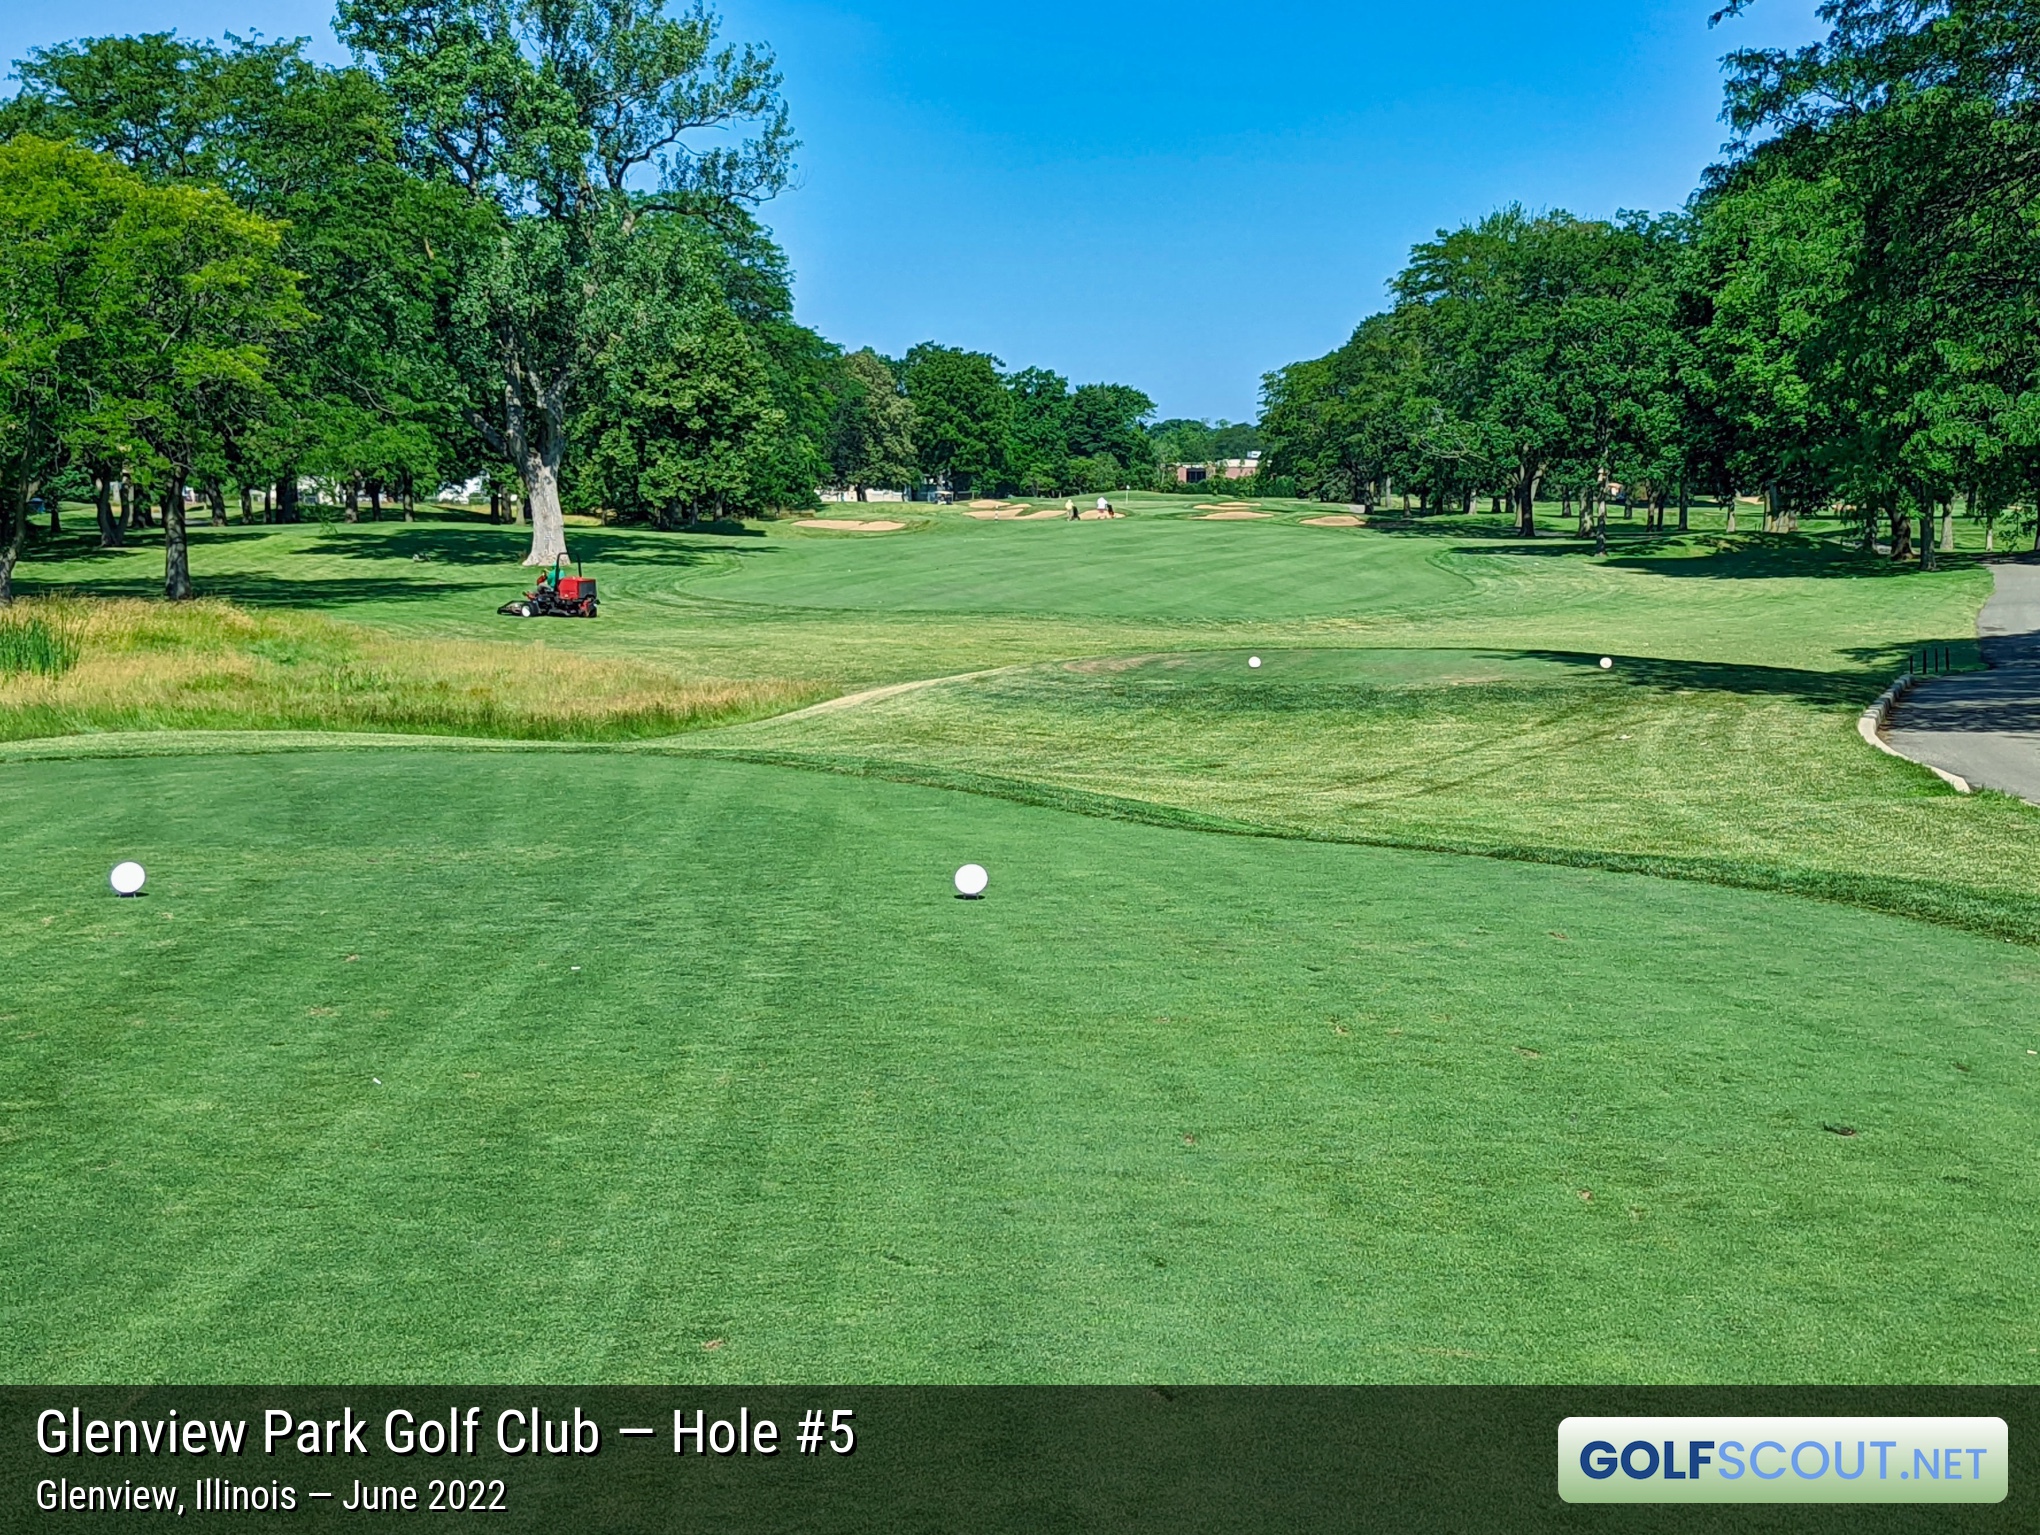 Photo of hole #5 at Glenview Park Golf Club in Glenview, Illinois. 